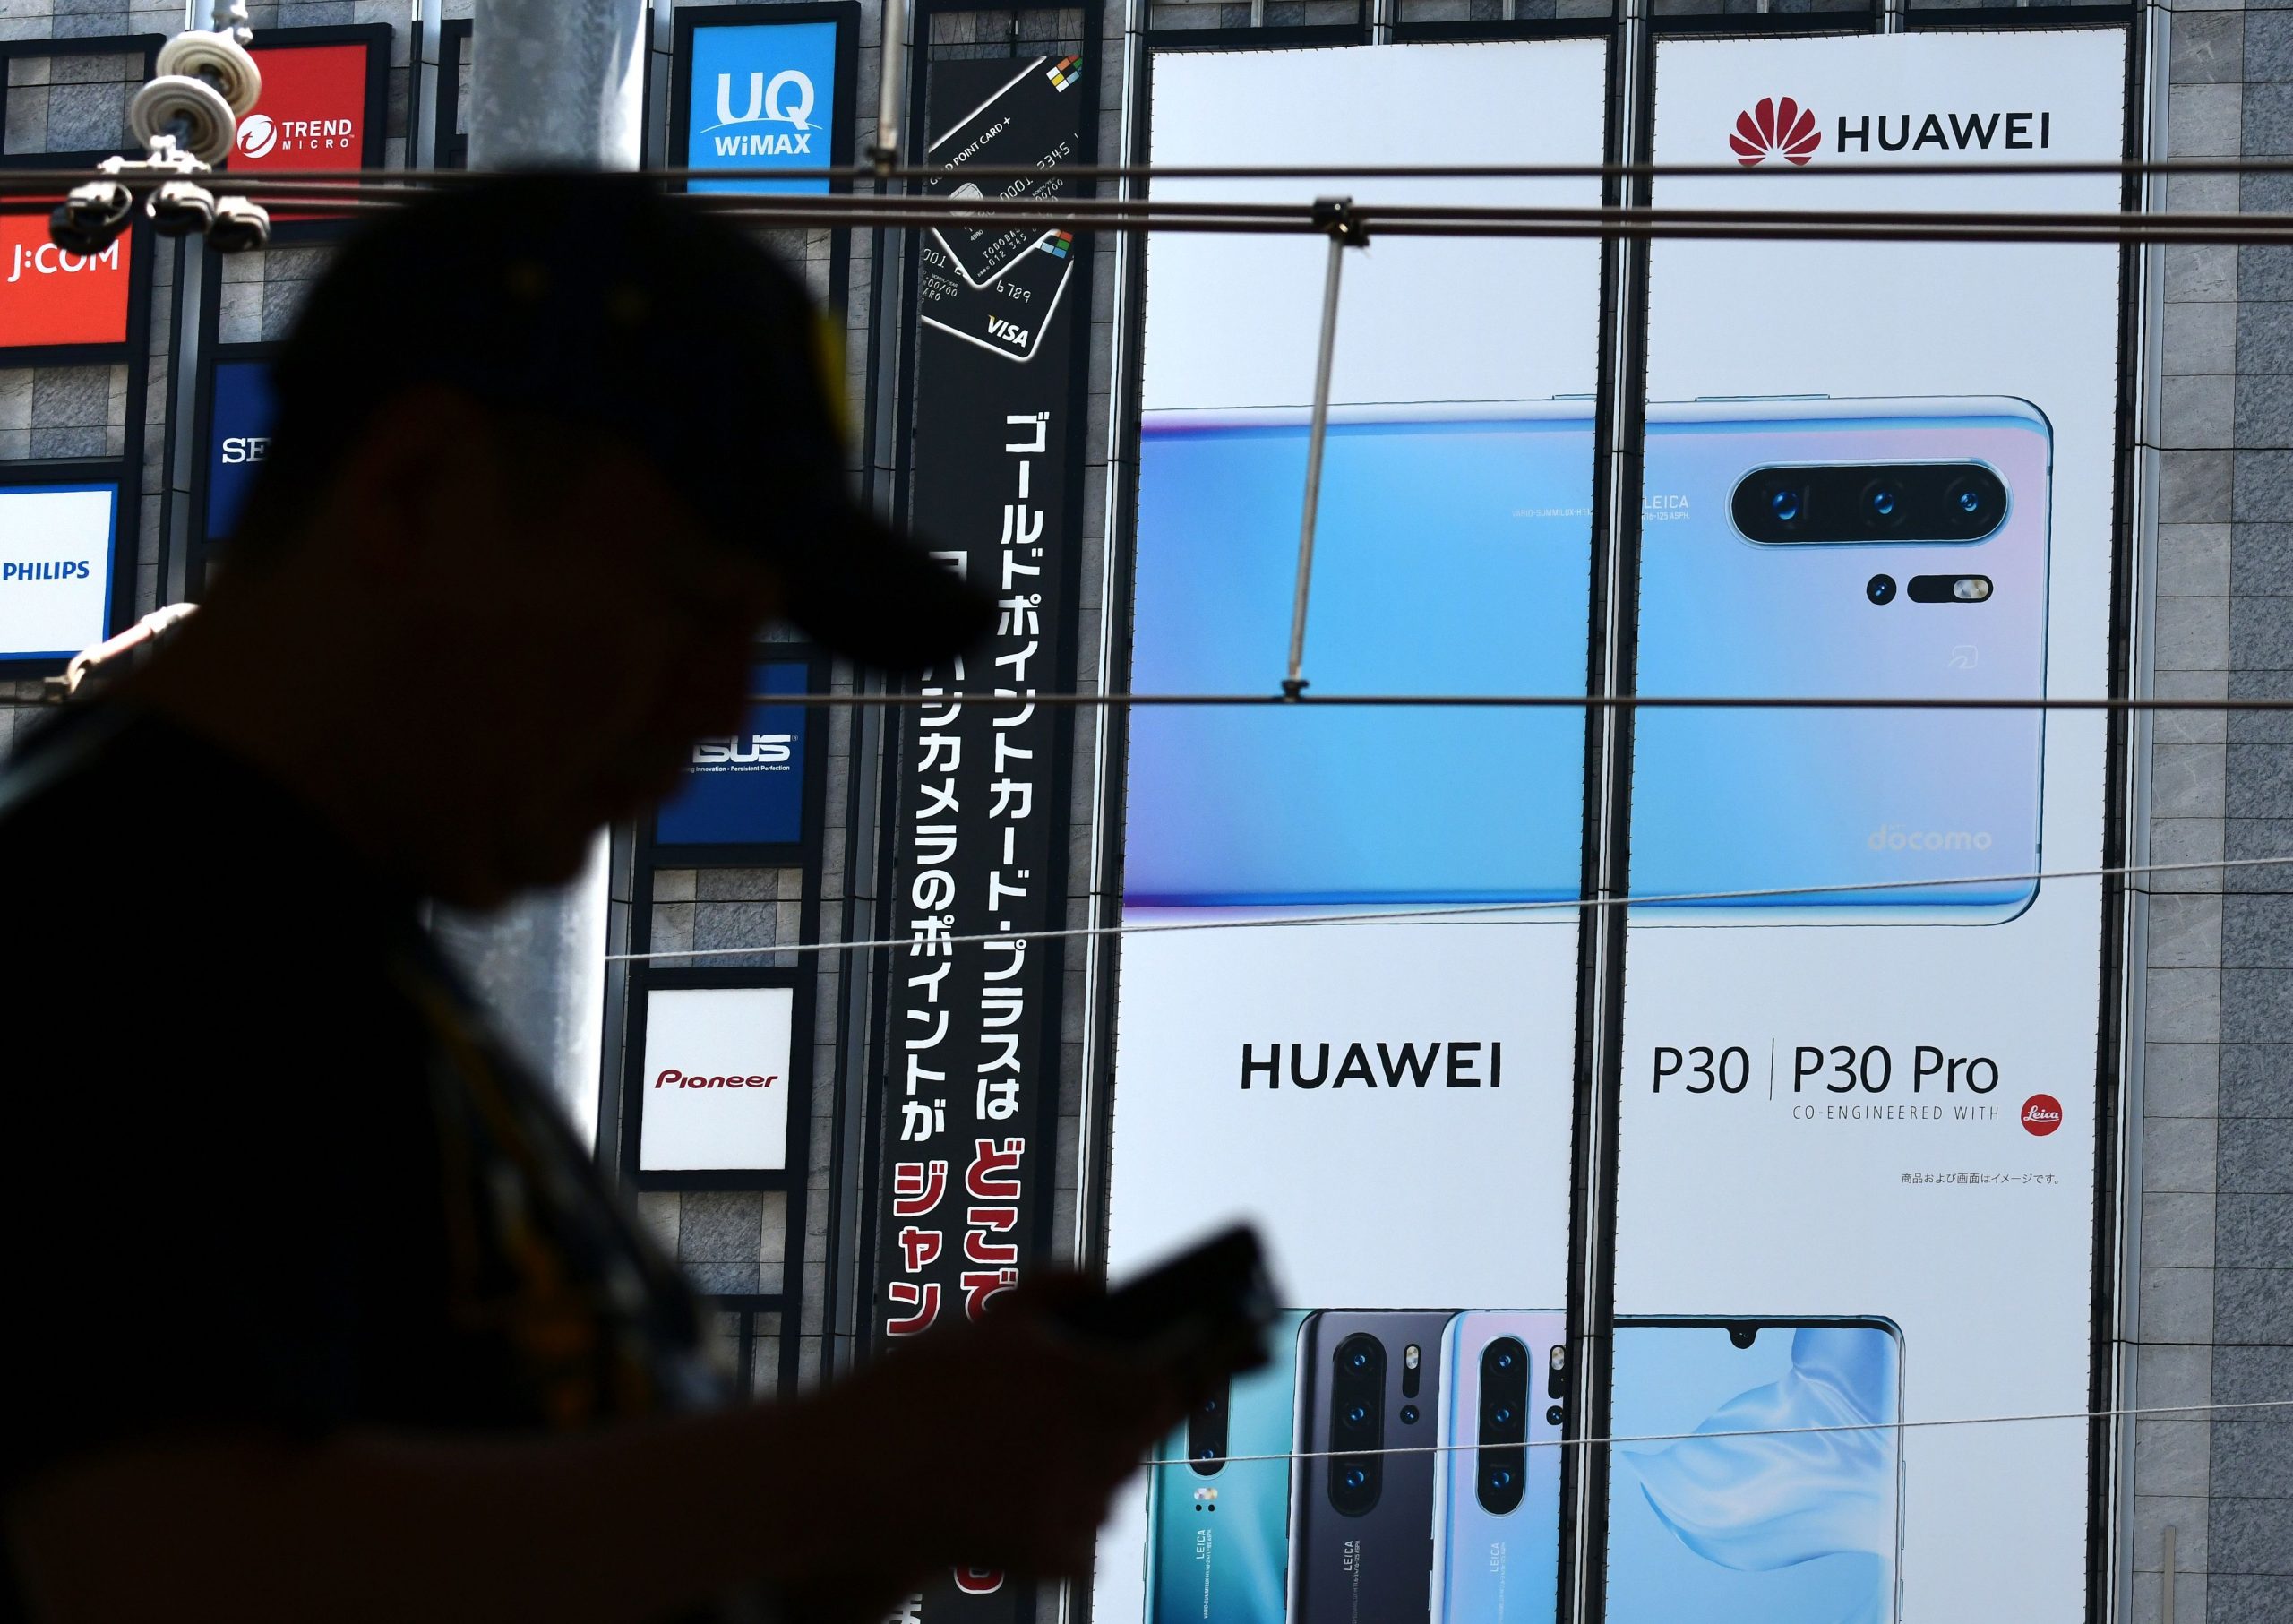 Huawei Wants to Play Nice With Google and Microsoft, But Has Its 'Last Resort' Ready